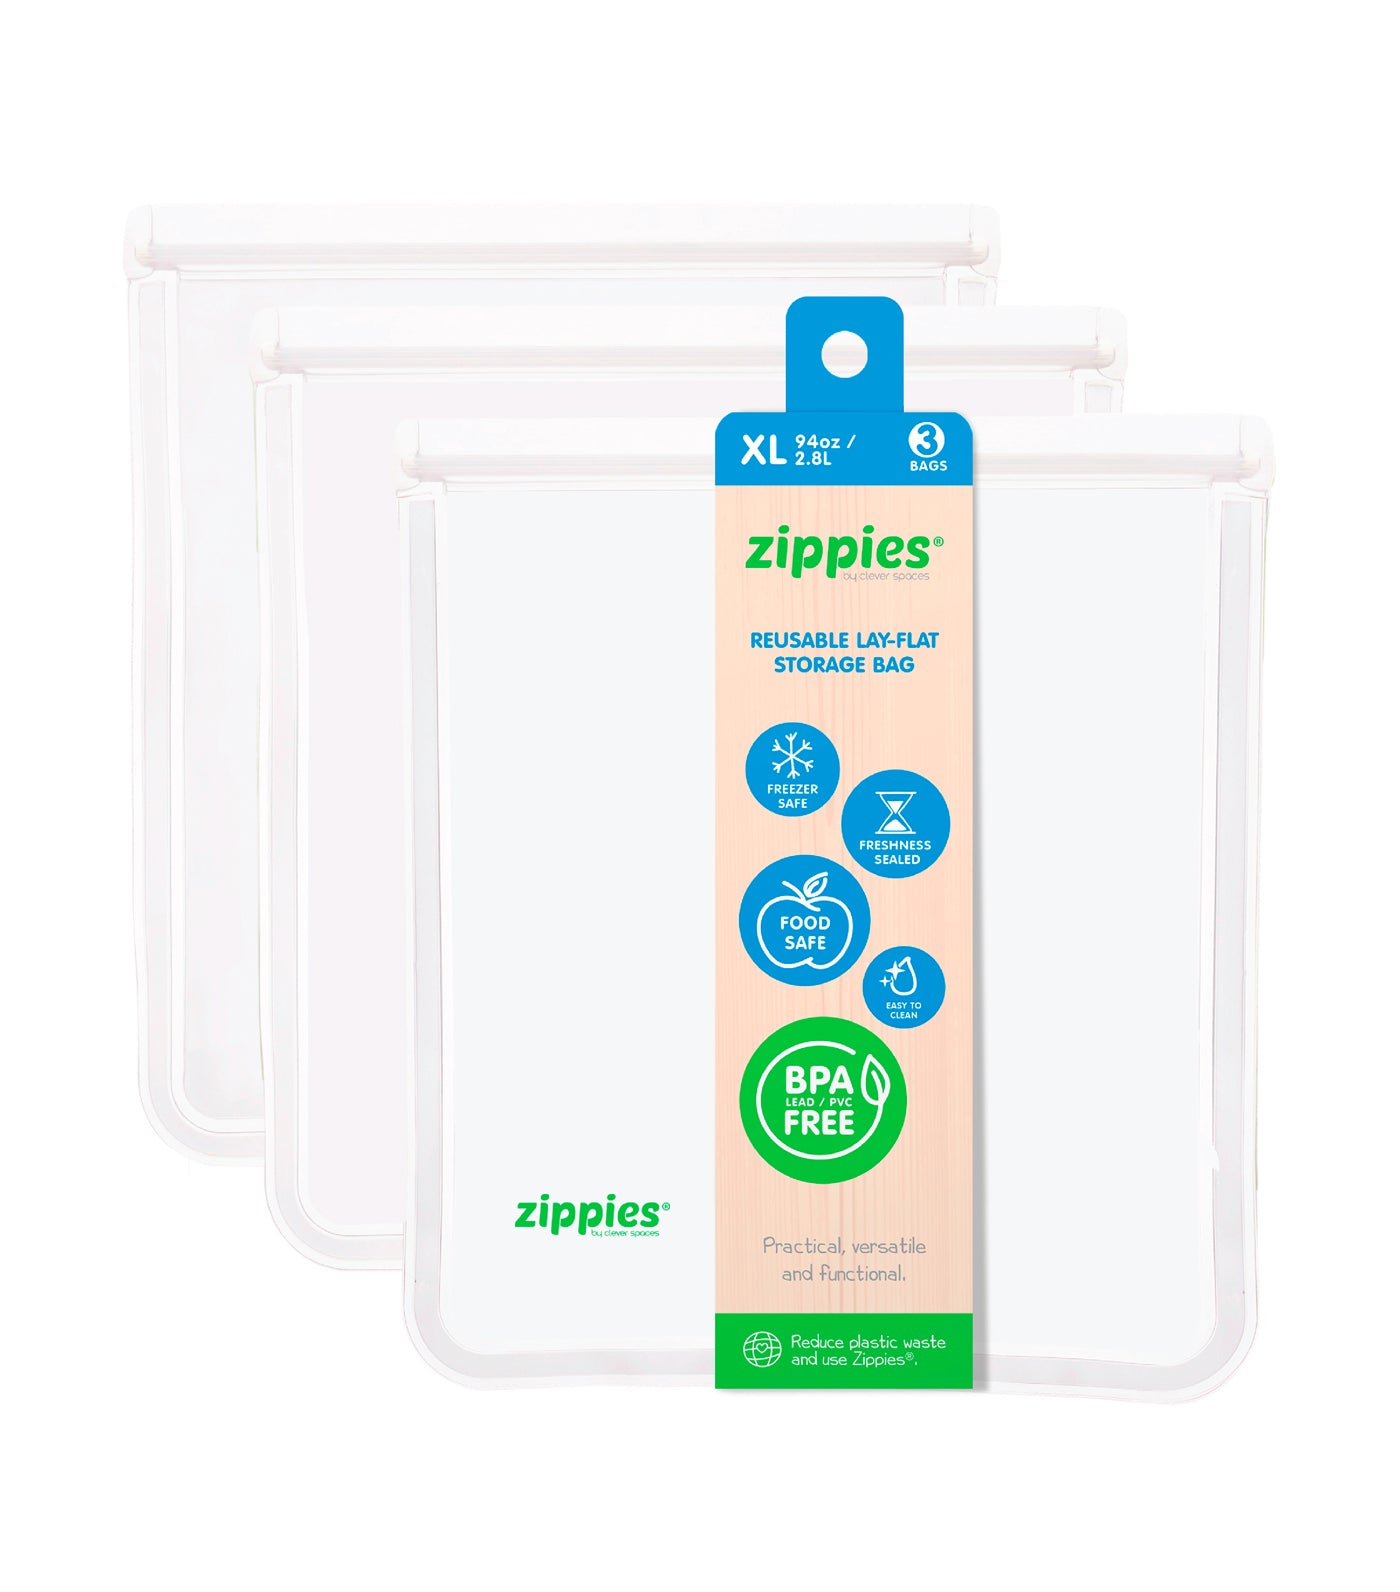 zippies lay-flat storage bags - extra large (3 bags)